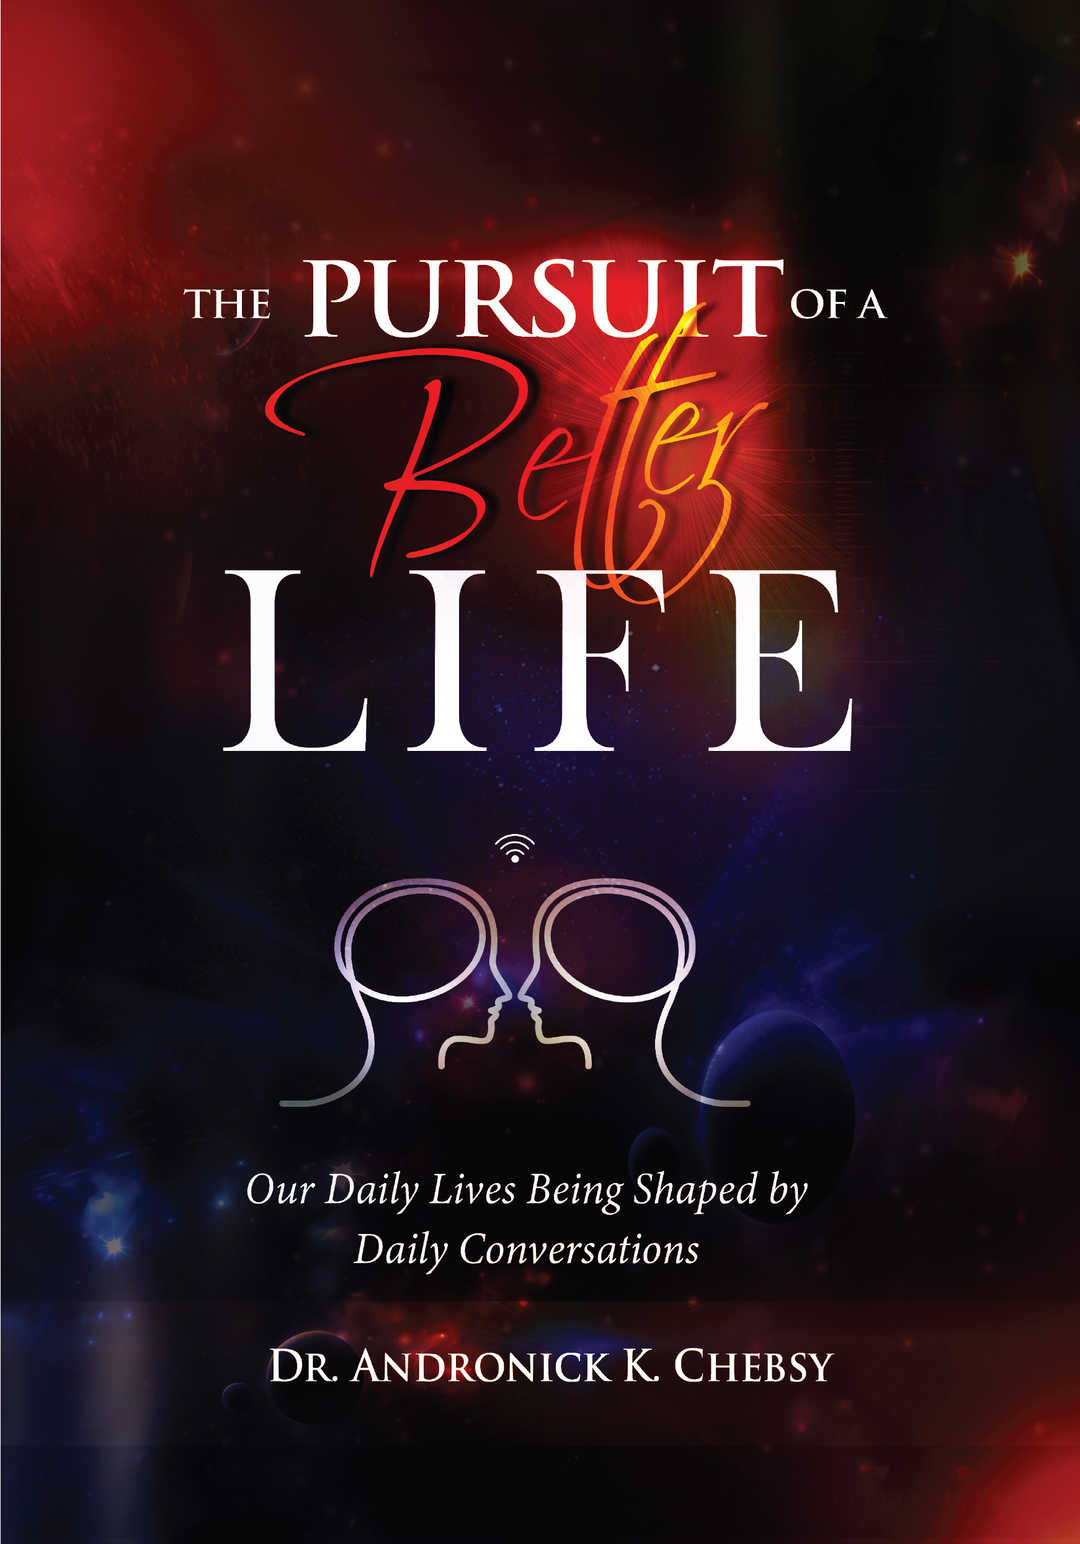 The Pursuit of a Better Life: Our Lives Being Shaped by Our Daily Conversations